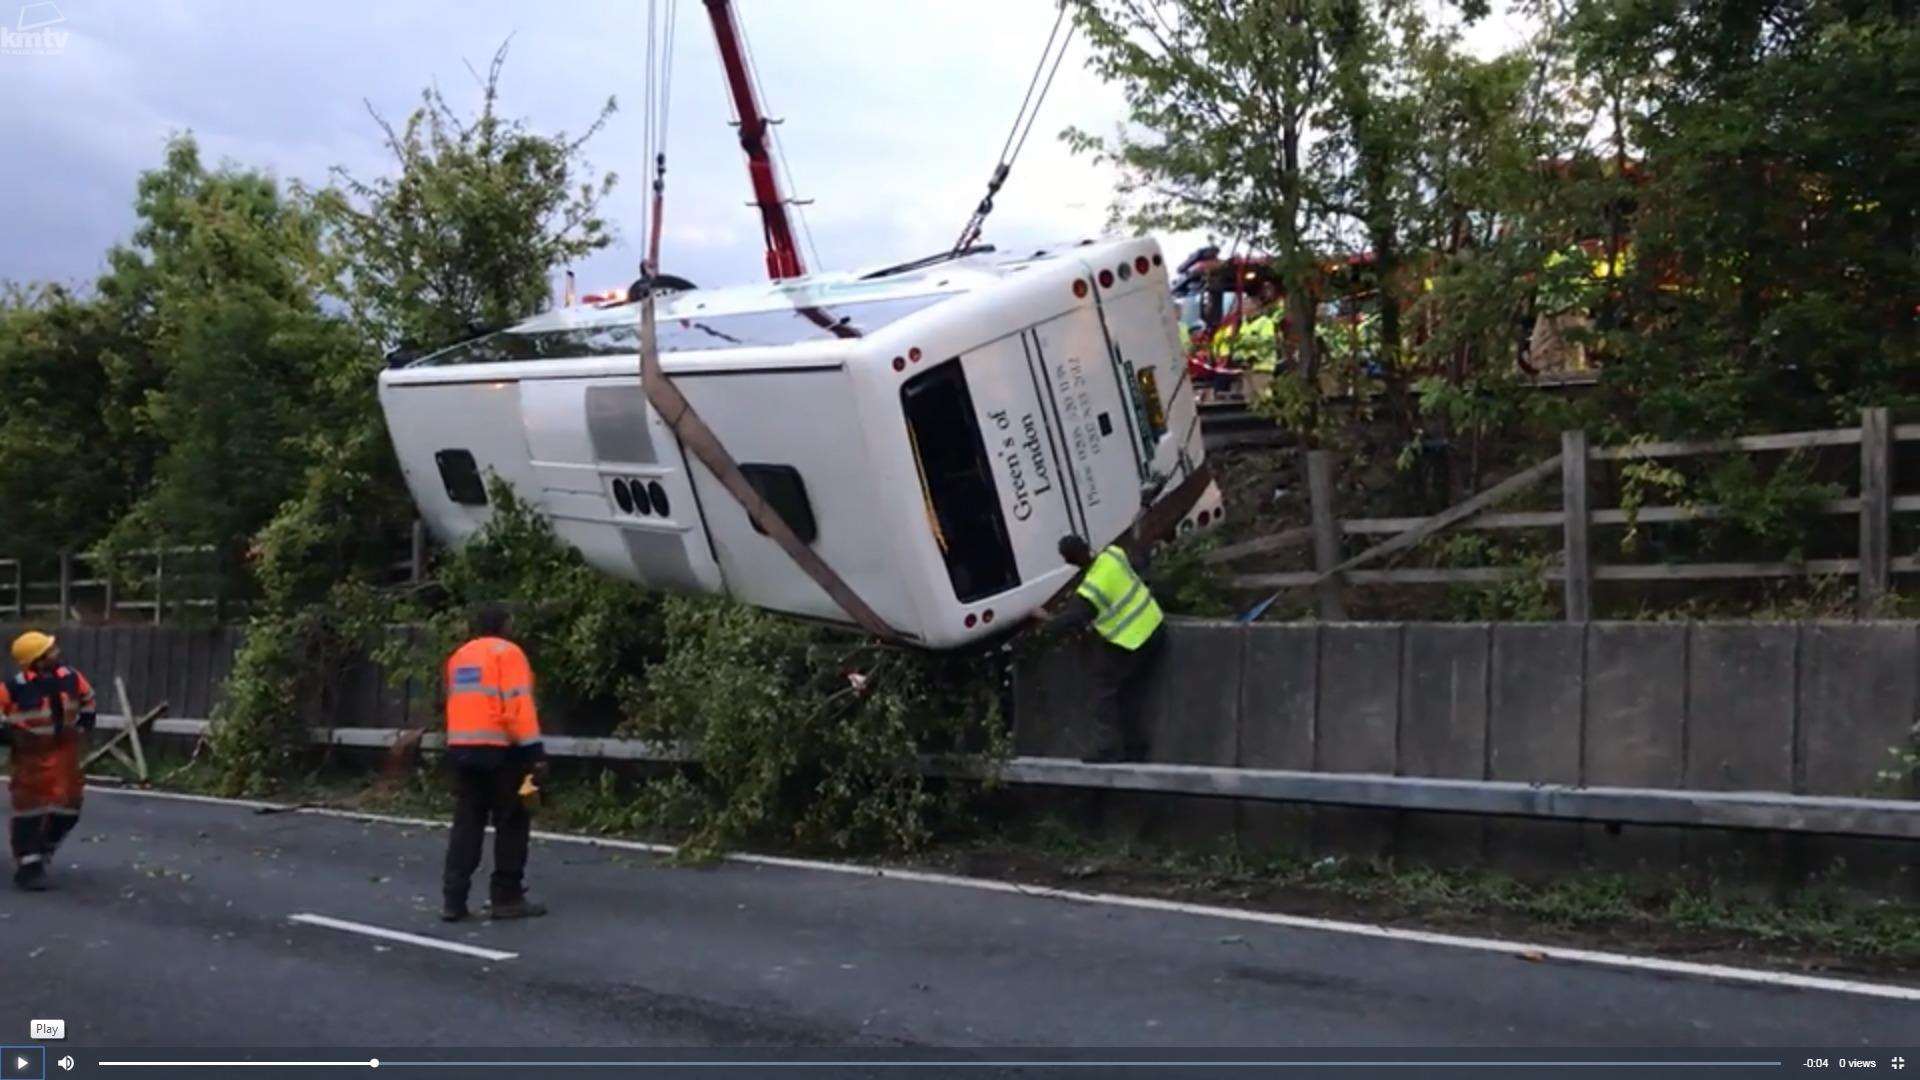 The overturned coach